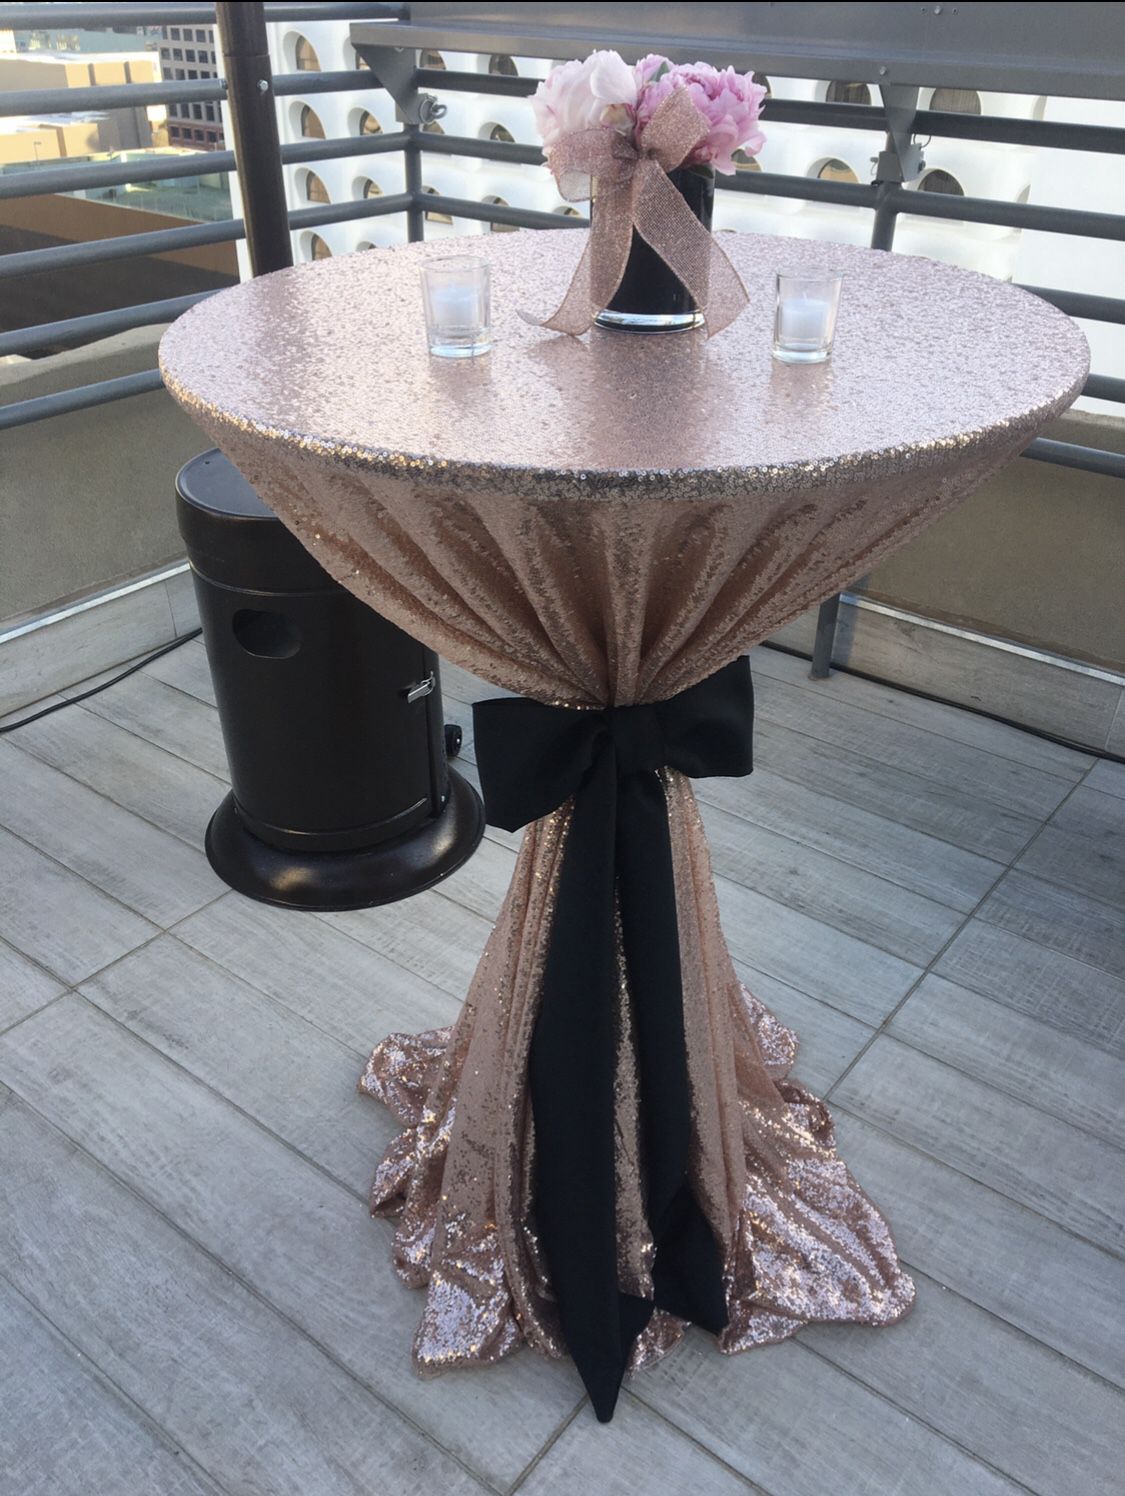 Rose Gold Sequin Linens -5 of 132” Round and 1 -108” Round